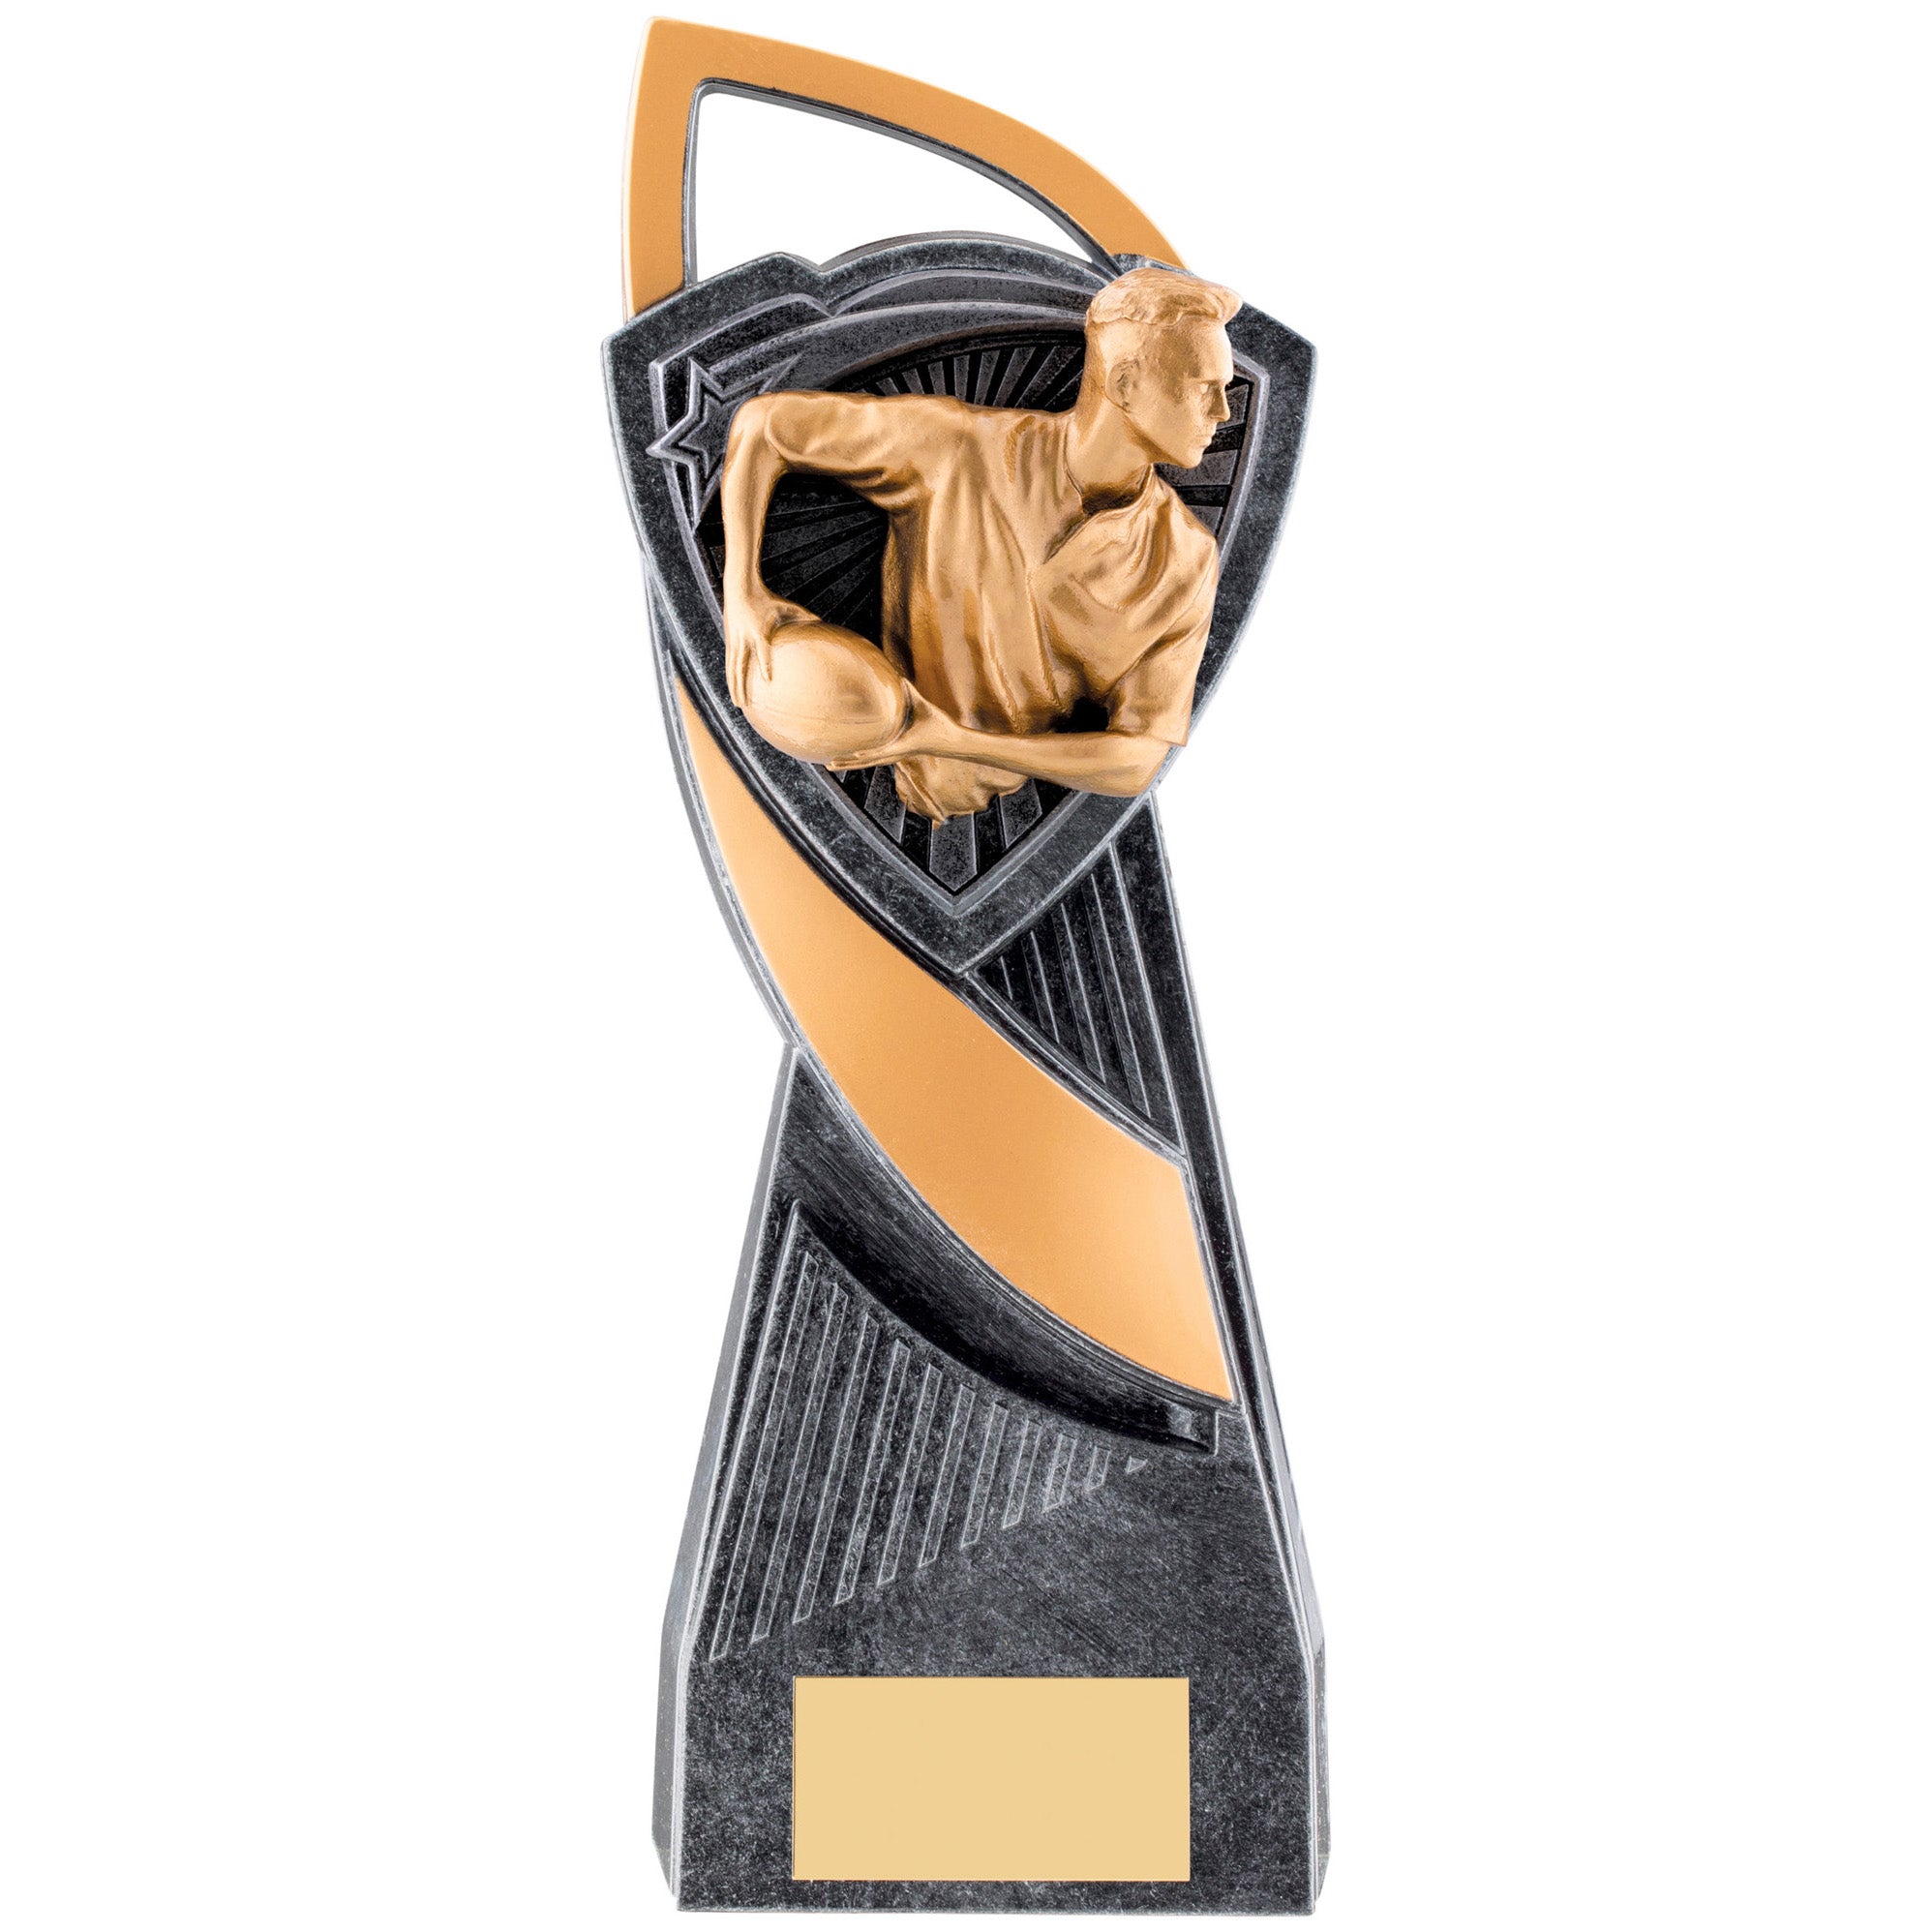 Utopia Male Rugby Trophy (Gold/Silver)